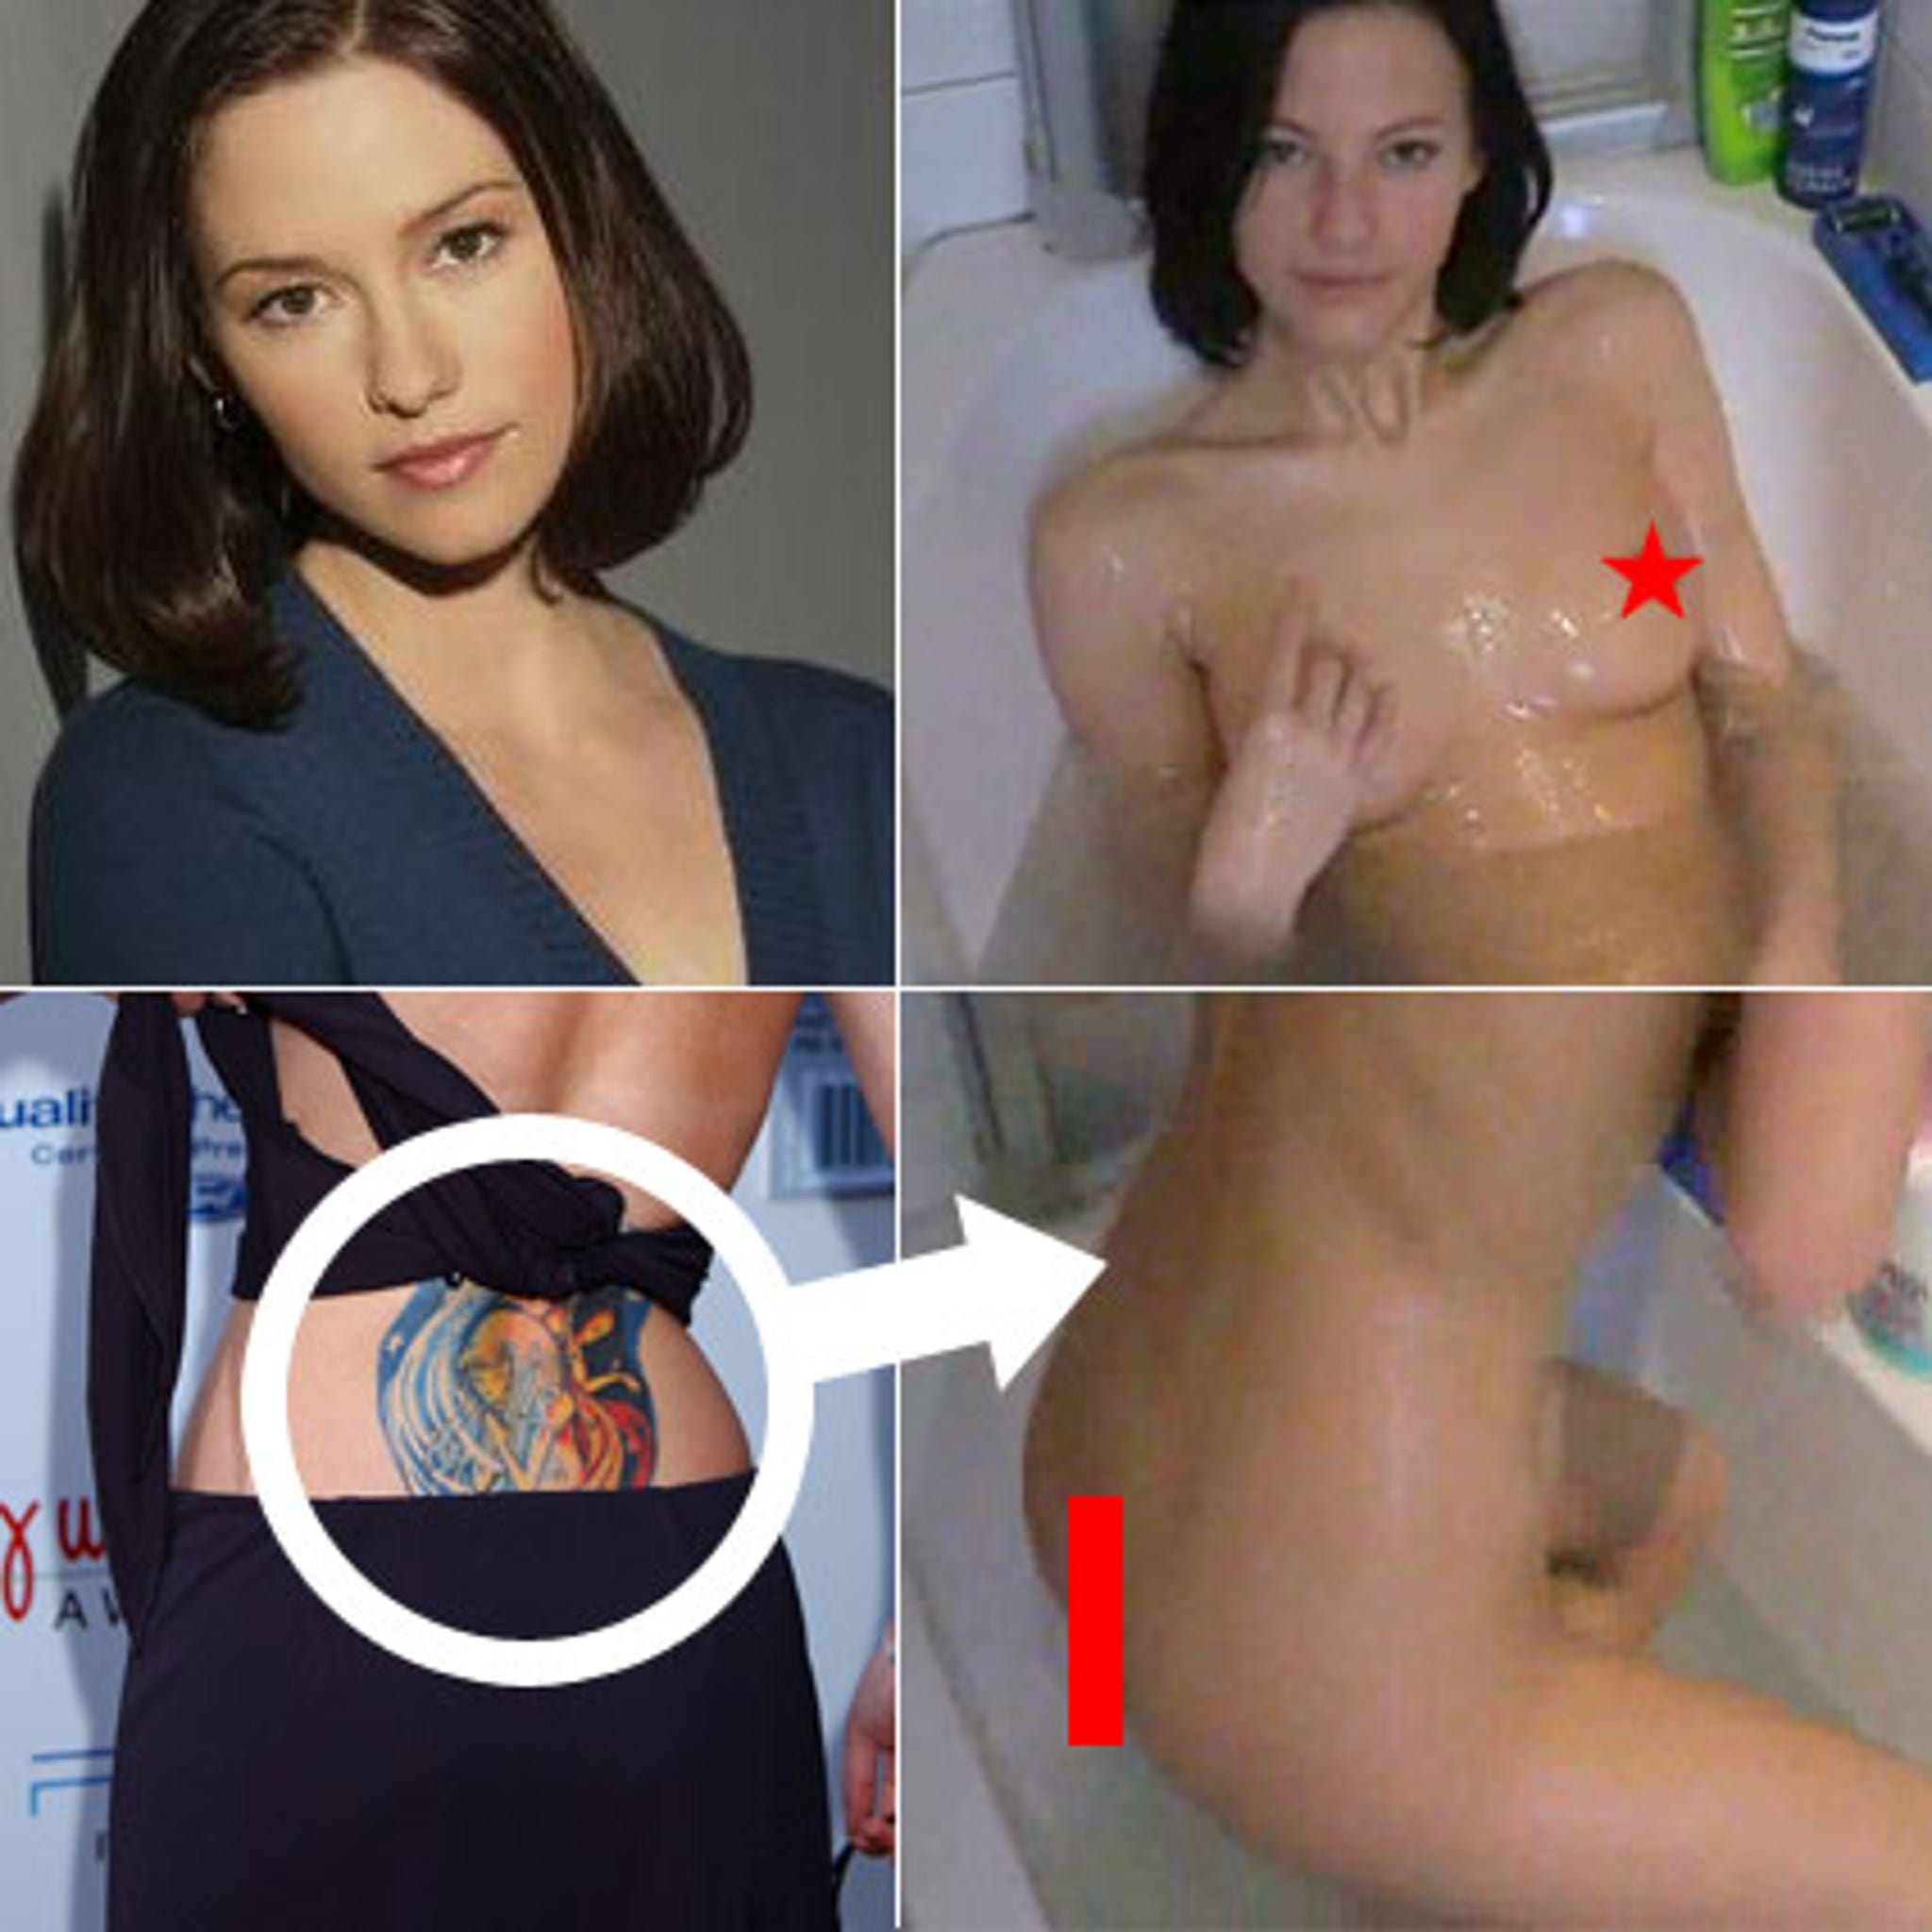 Chyler leigh nude pictures